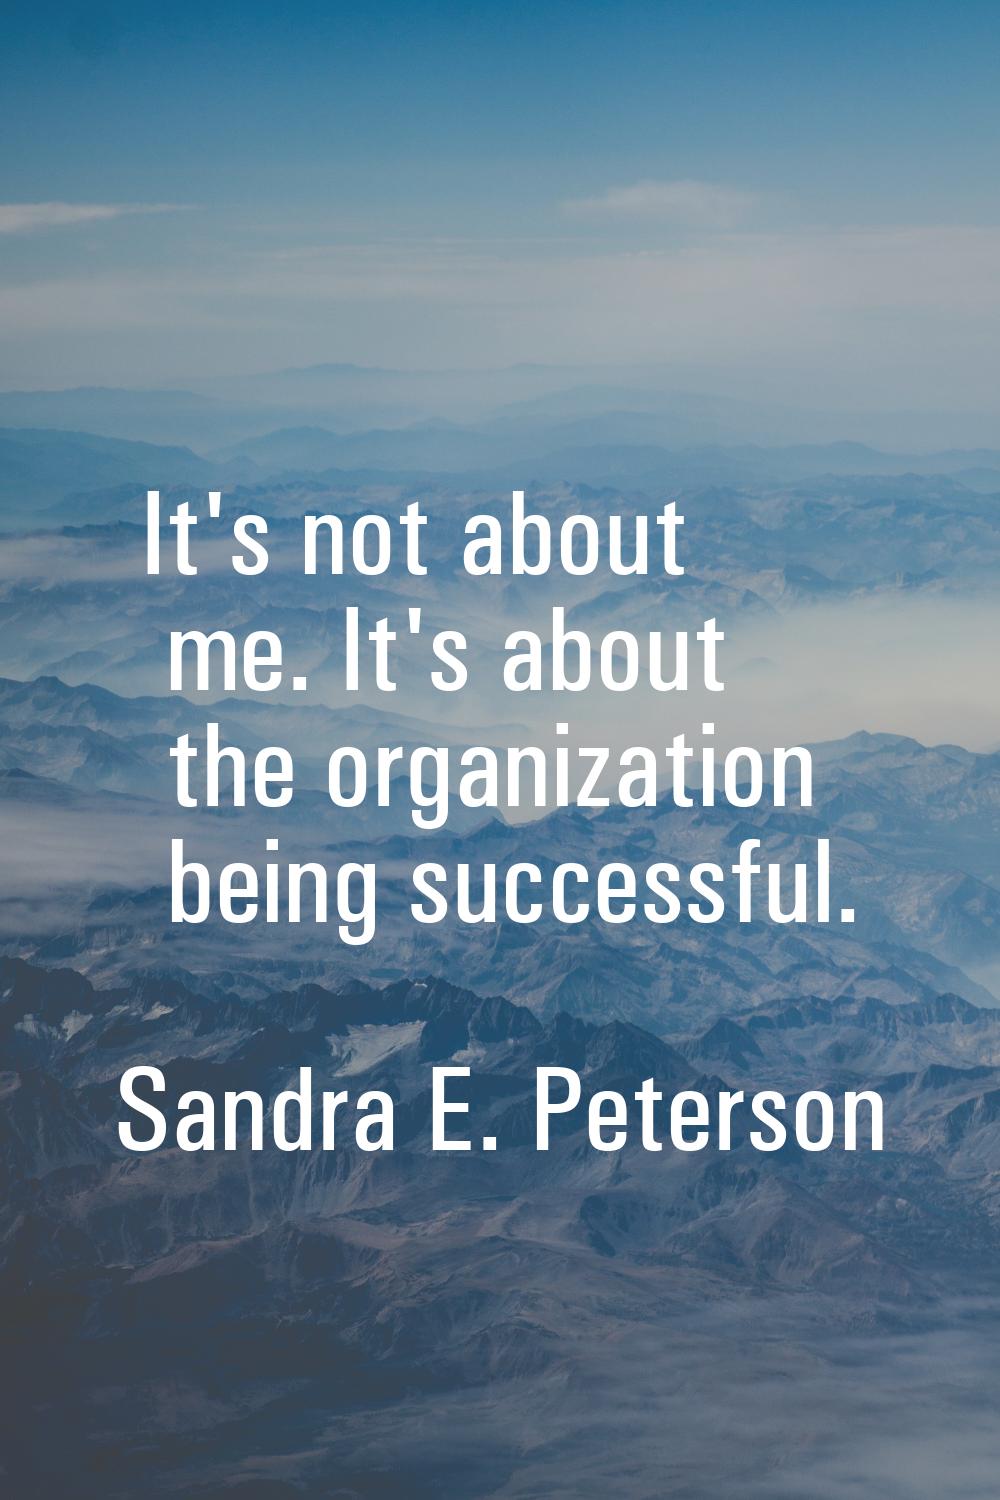 It's not about me. It's about the organization being successful.